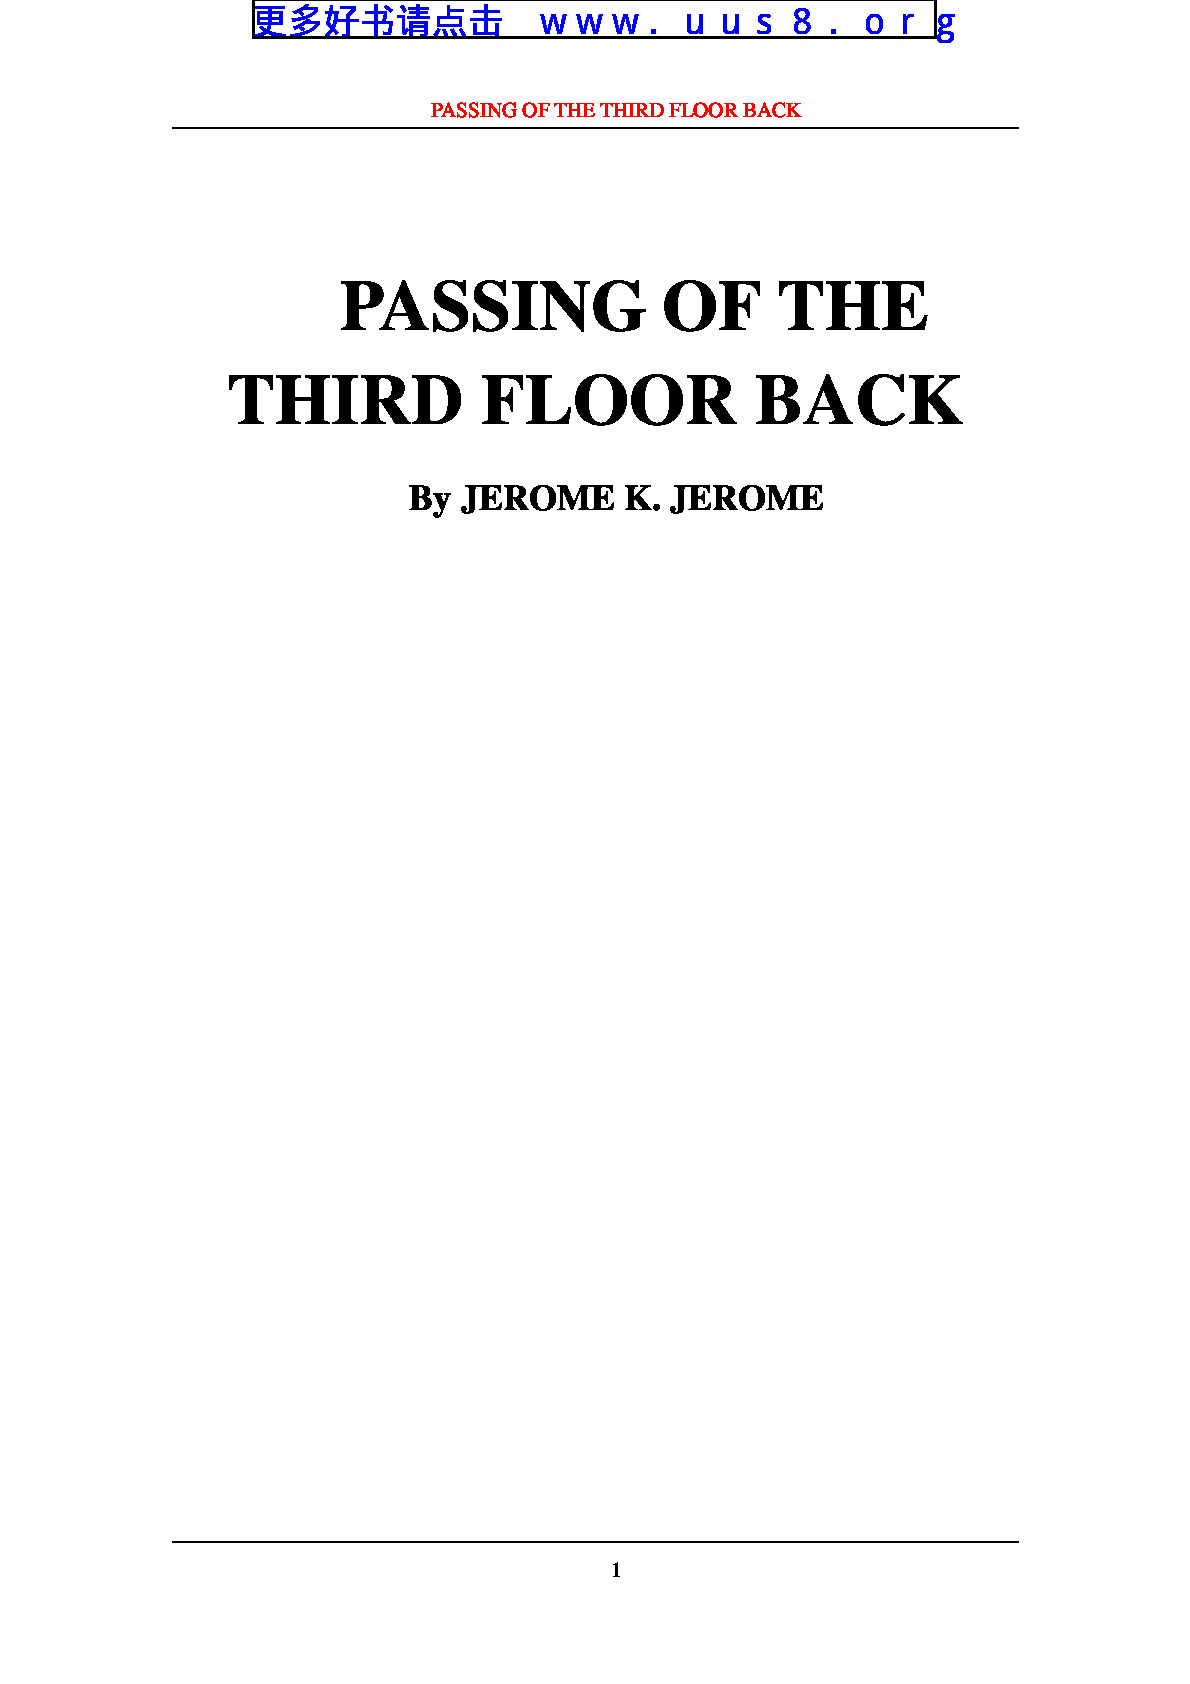 PASSING_OF_THE_THIRD_FLOOR_BACK(三楼去又回) – 副本